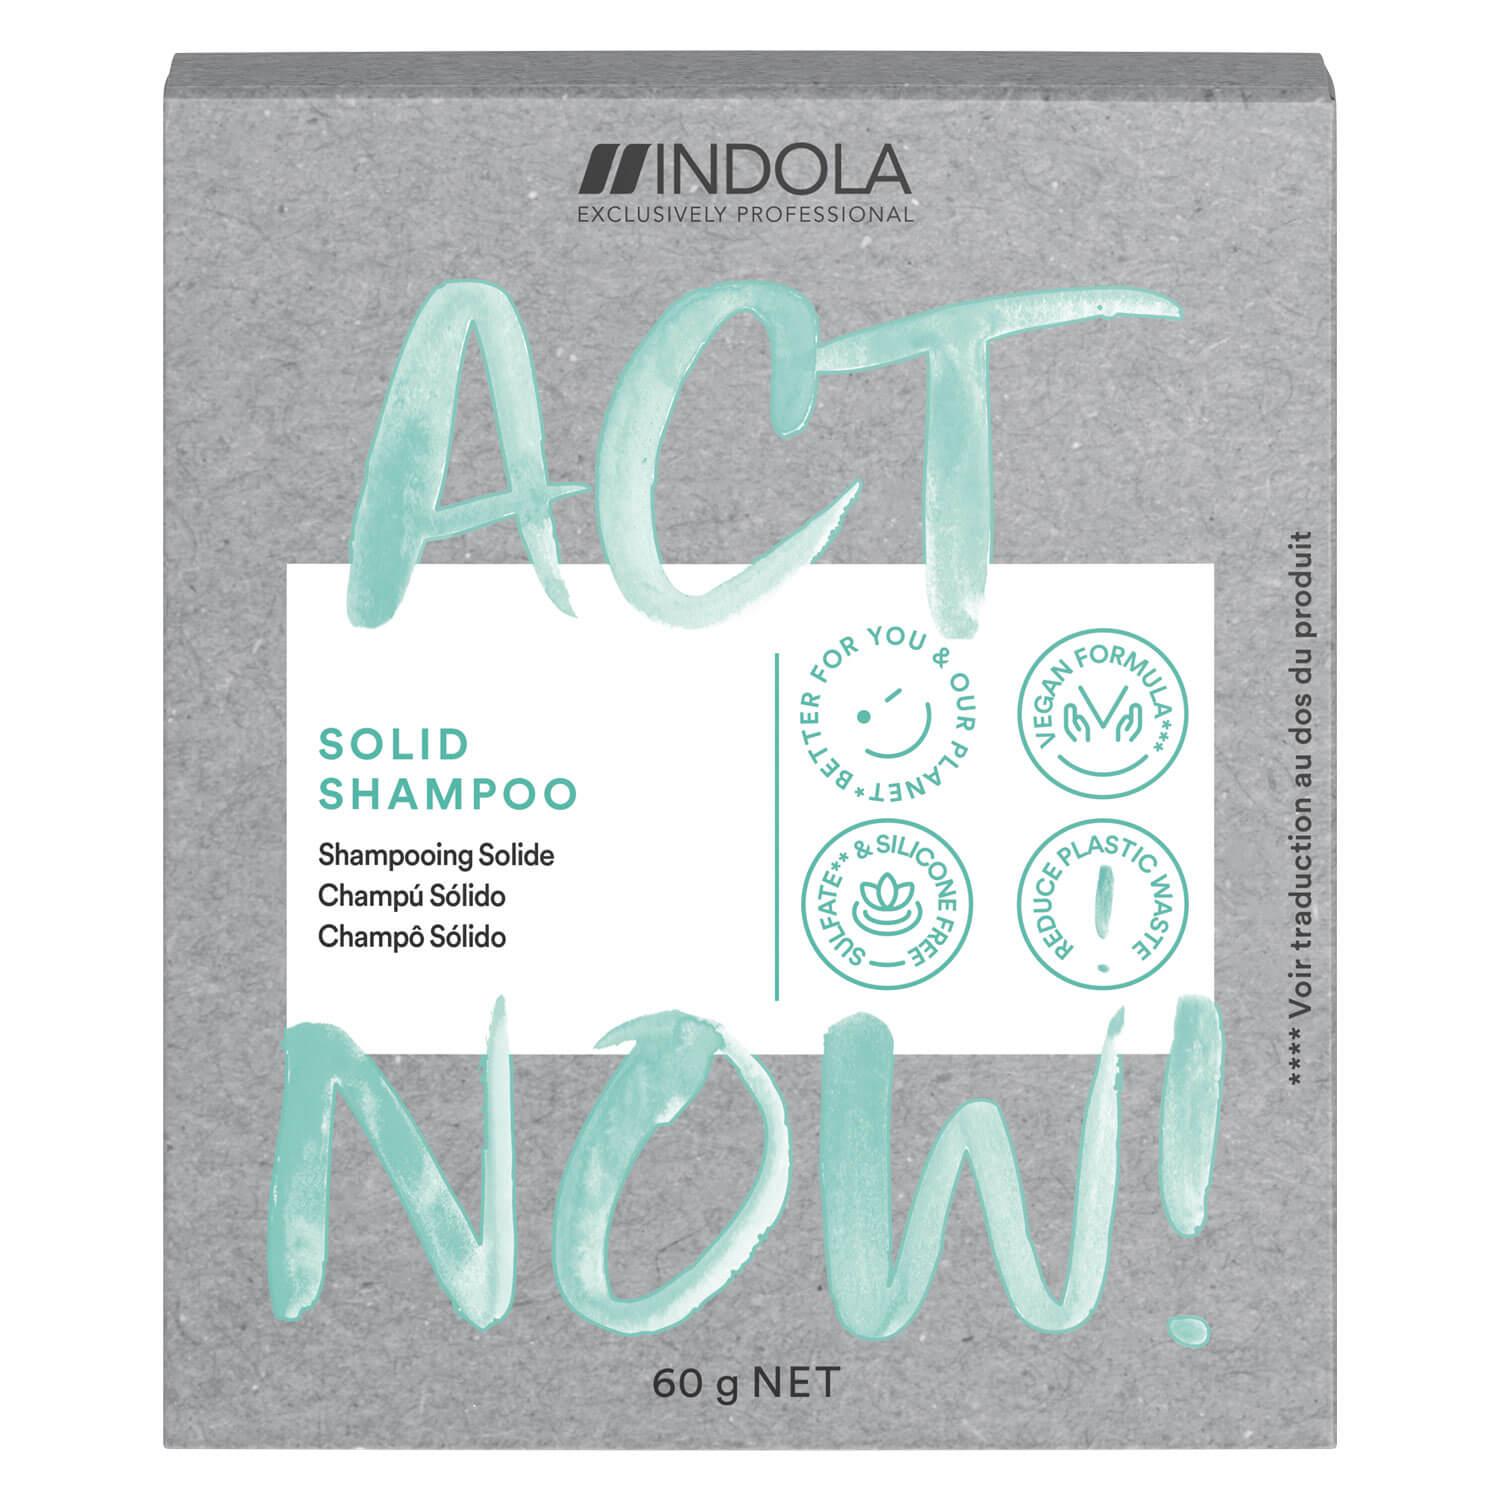 ACT NOW - Solid Shampoo